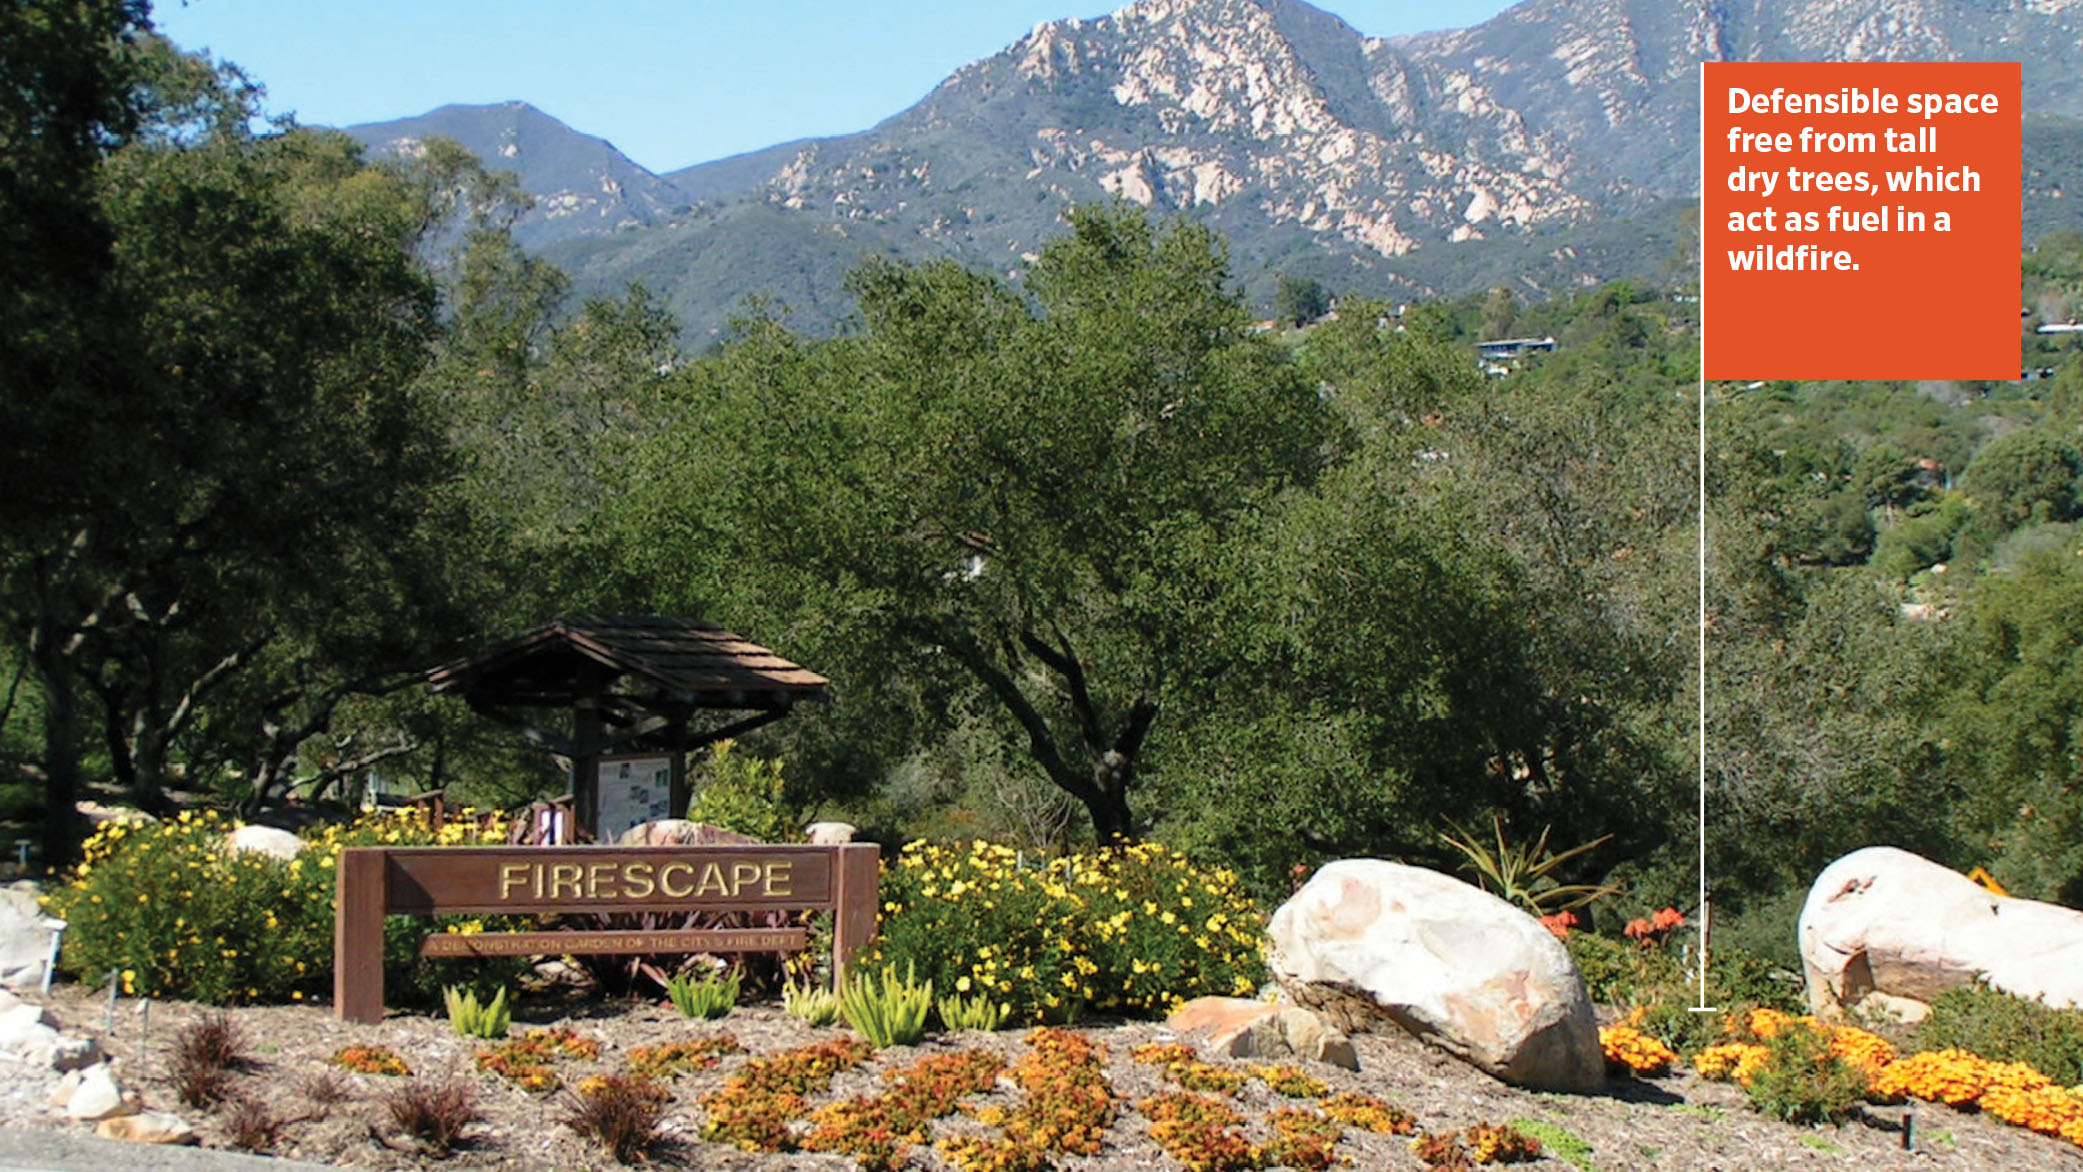 The Firescape Garden is located in the foothills behind Santa Barbara. The road in the foreground serves as the approximate location of the house the firescaped garden is protecting.